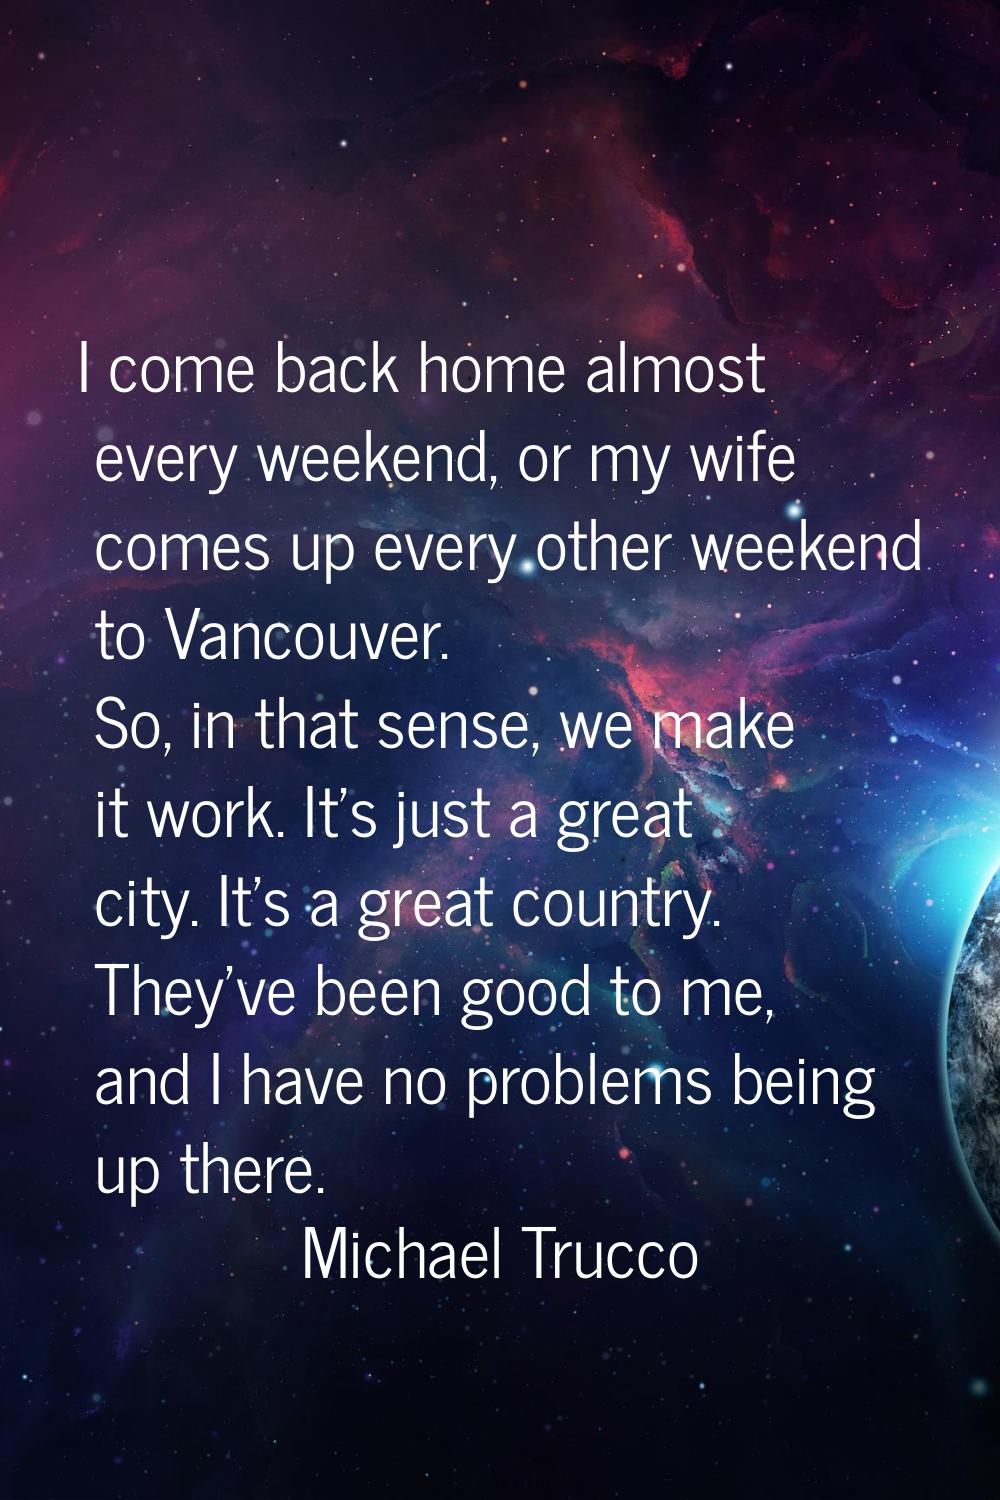 I come back home almost every weekend, or my wife comes up every other weekend to Vancouver. So, in